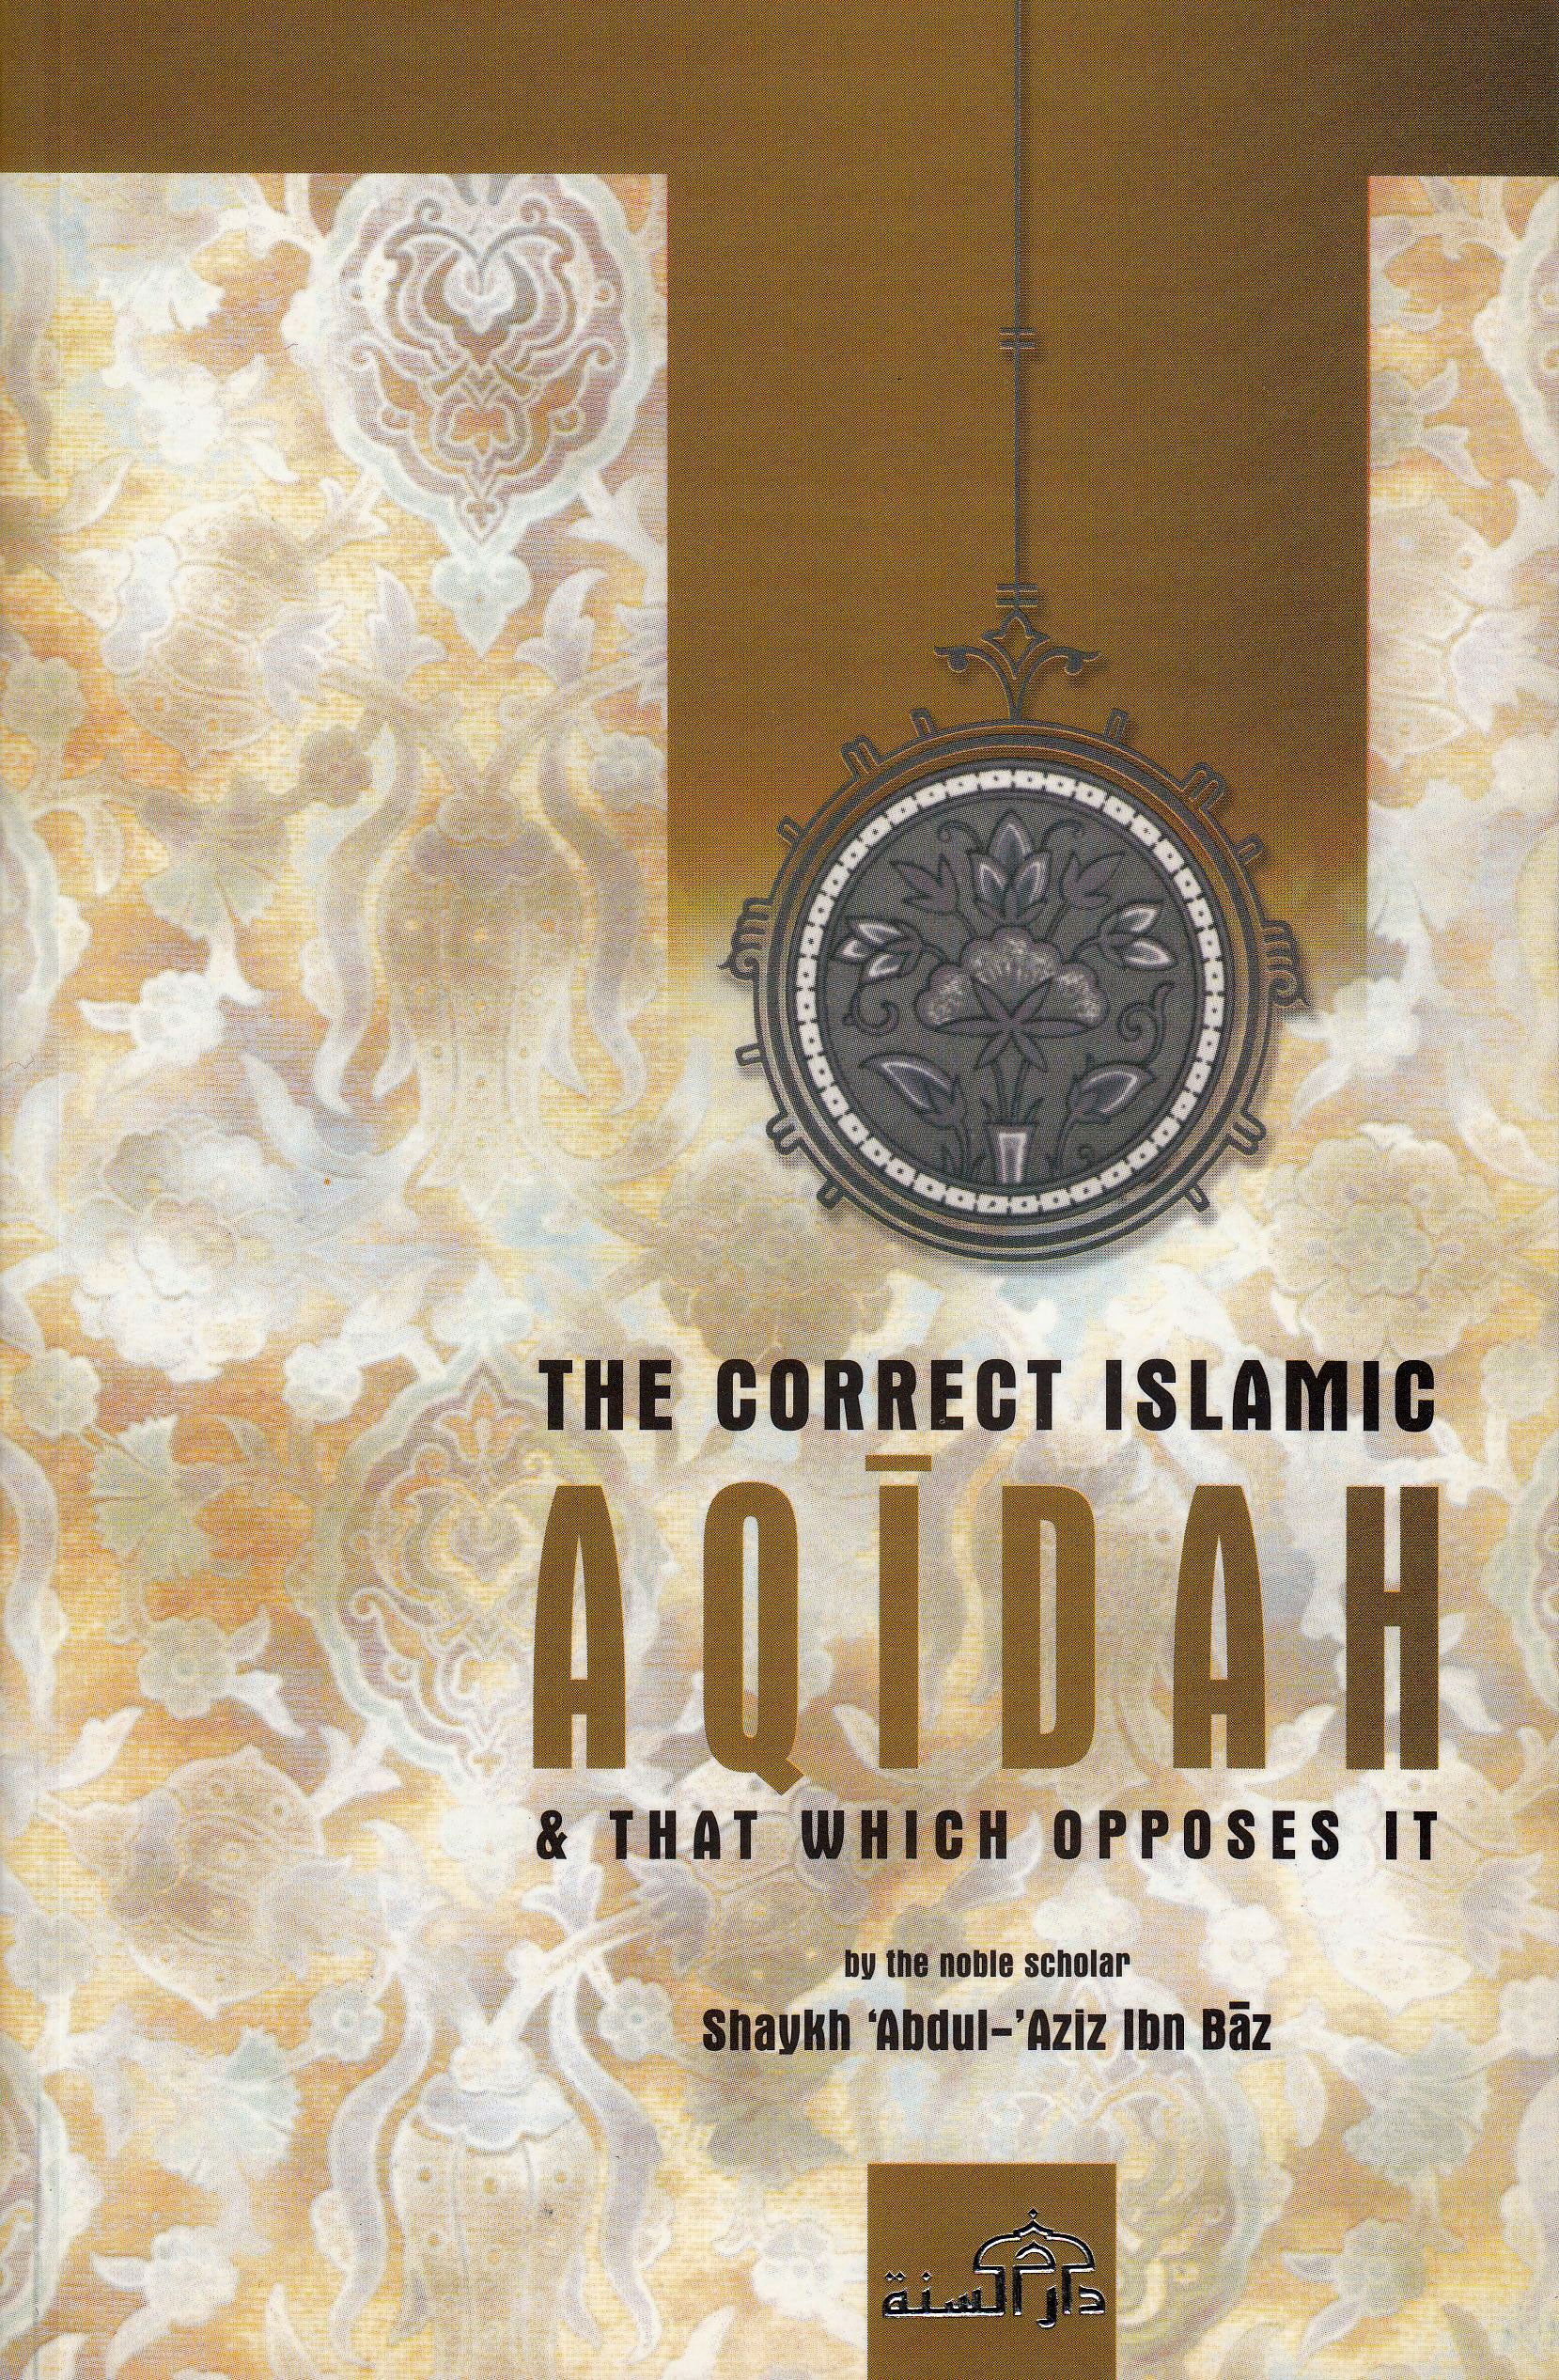 The Correct Islaamic Aqeedah & that which opposes it